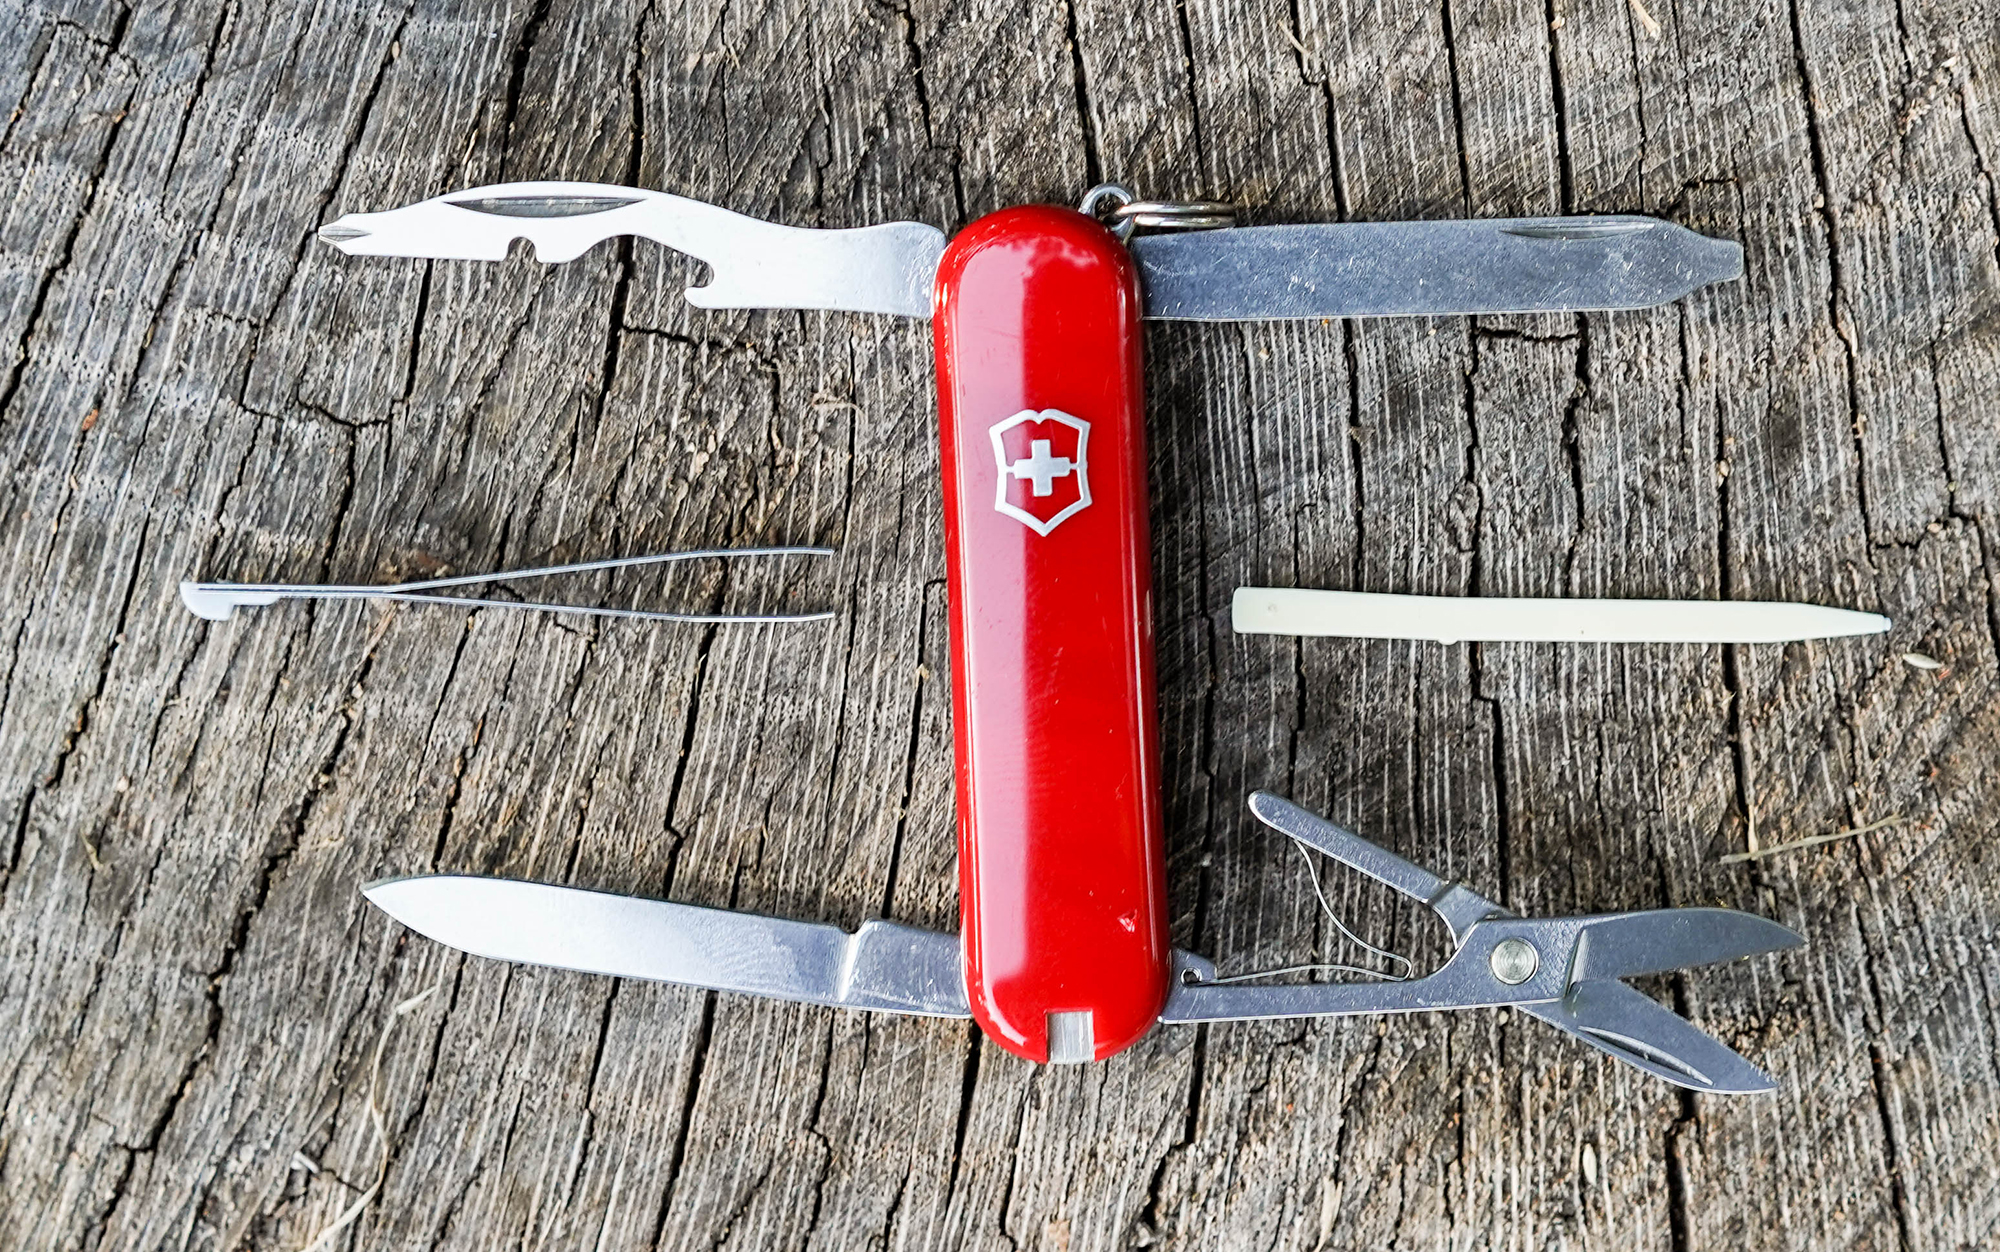 Victorinox Tinker Swiss Army Knife and Keychain Knife Sharpener Set  Unboxing and Review 